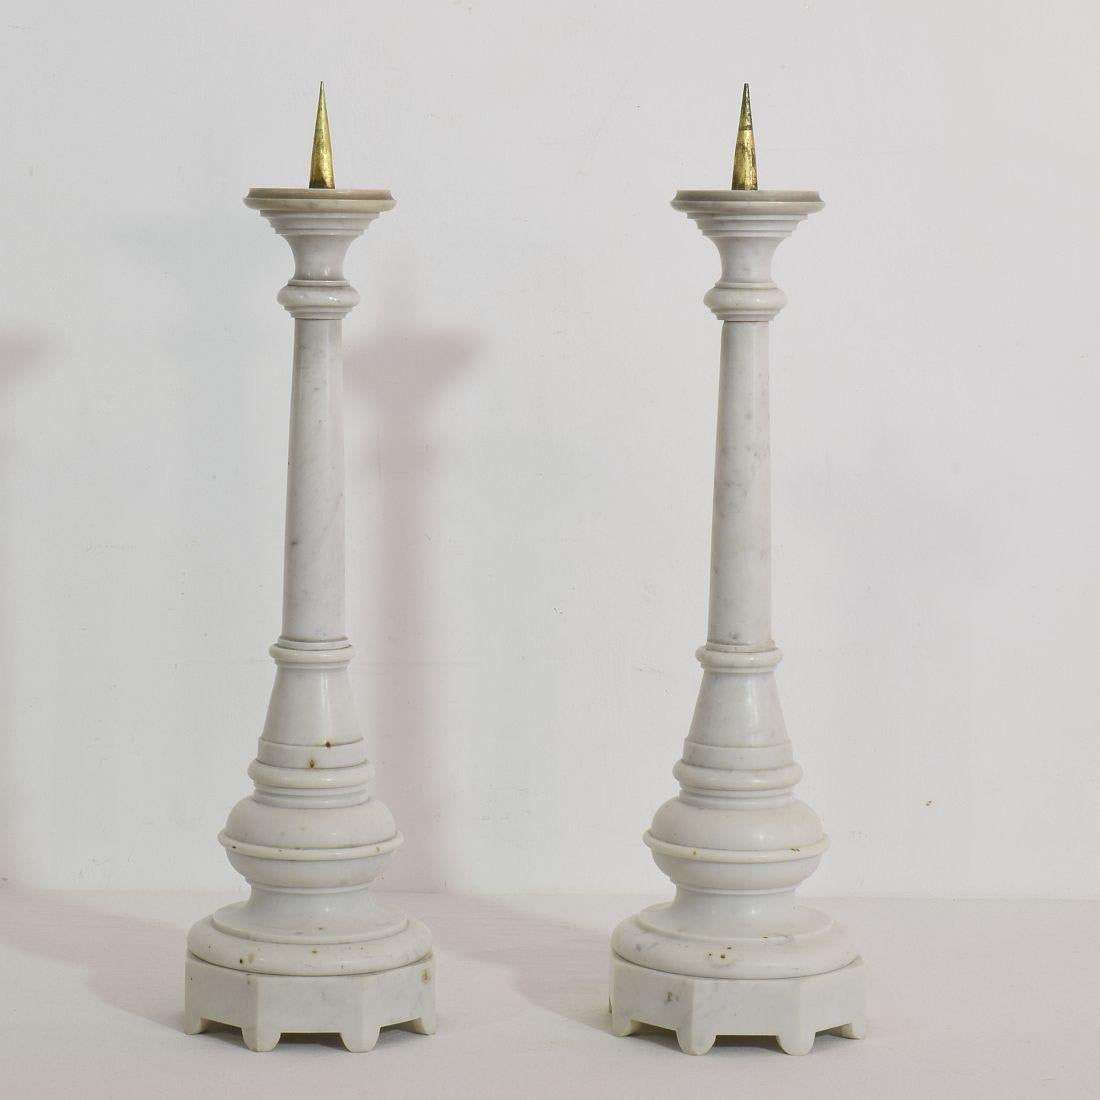 Gothic Revival Couple of 19th Century French White Marble Candlesticks